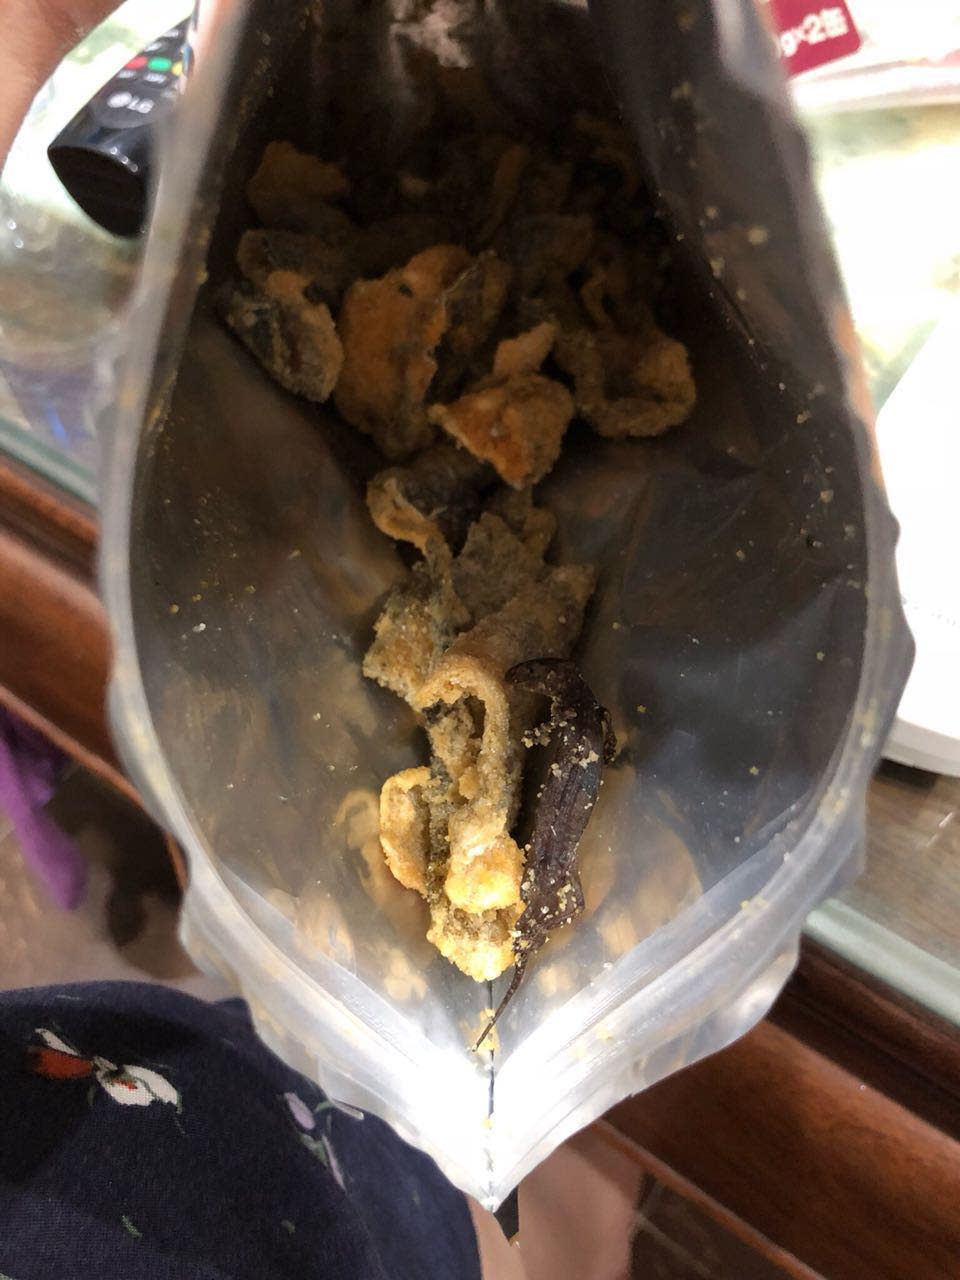 A dead gecko lizard found in a packet of Irvins Salted Egg fried fish skin snack product bought by Vietnamese Kevin Nguyen on 18 March 2018 at Changi Airport in Singapore. (PHOTO: Kevin Nguyen)